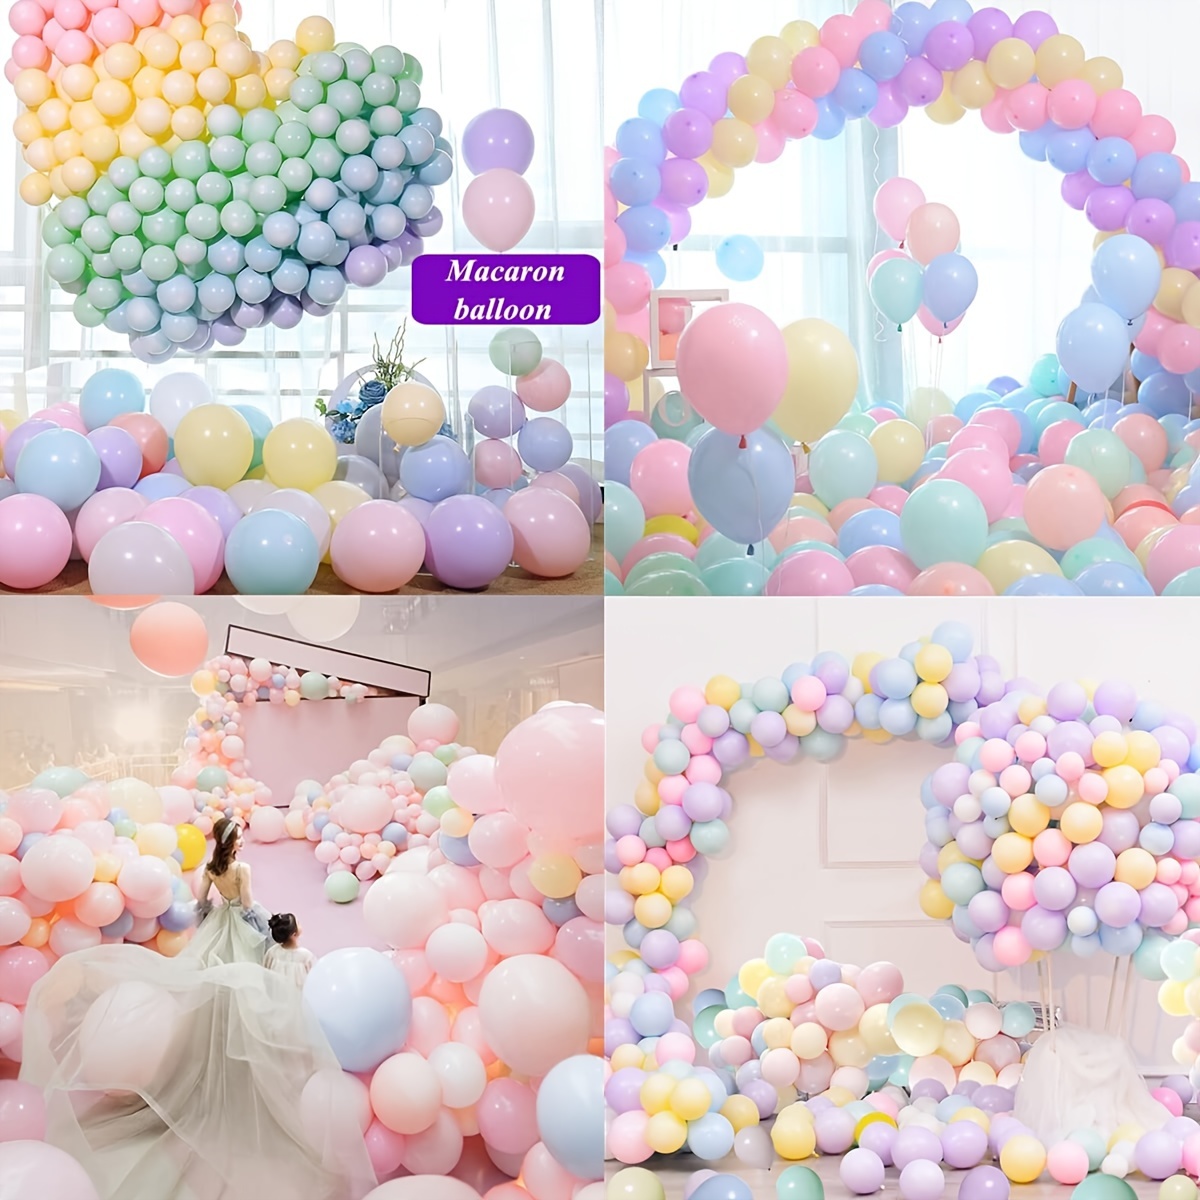 5 Inch Mini Pastel Latex Balloons 200pcs Assorted Macaron Candy Colored  Latex Party Balloons For Wedding Birthday Baby Shower Party Decor Supplies  Arc